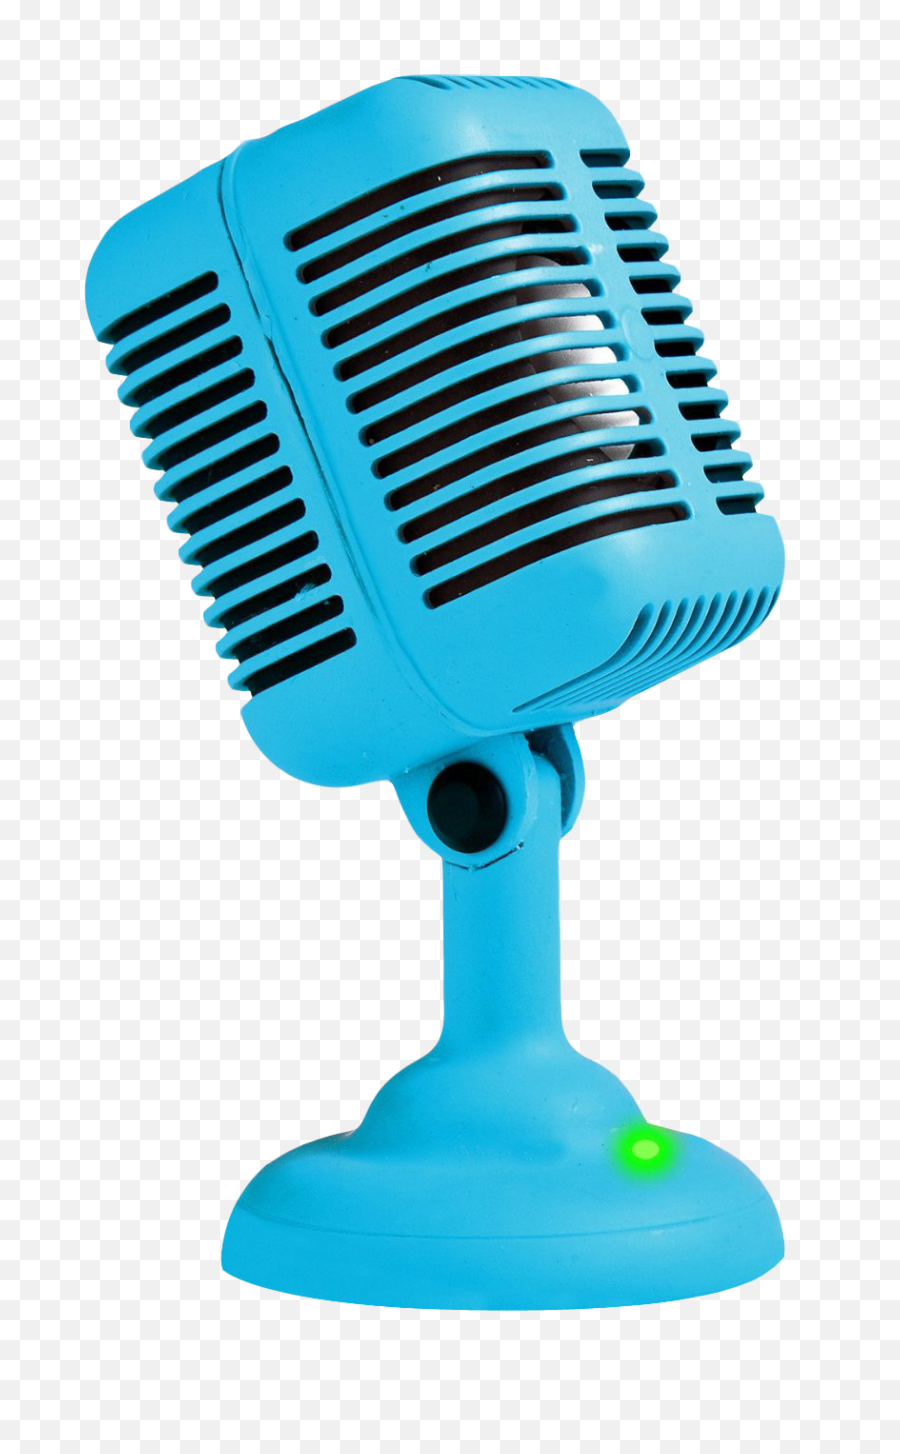 Download Free Png Microphone Stand - Png Blue Microphone,Microphone Clipart Transparent